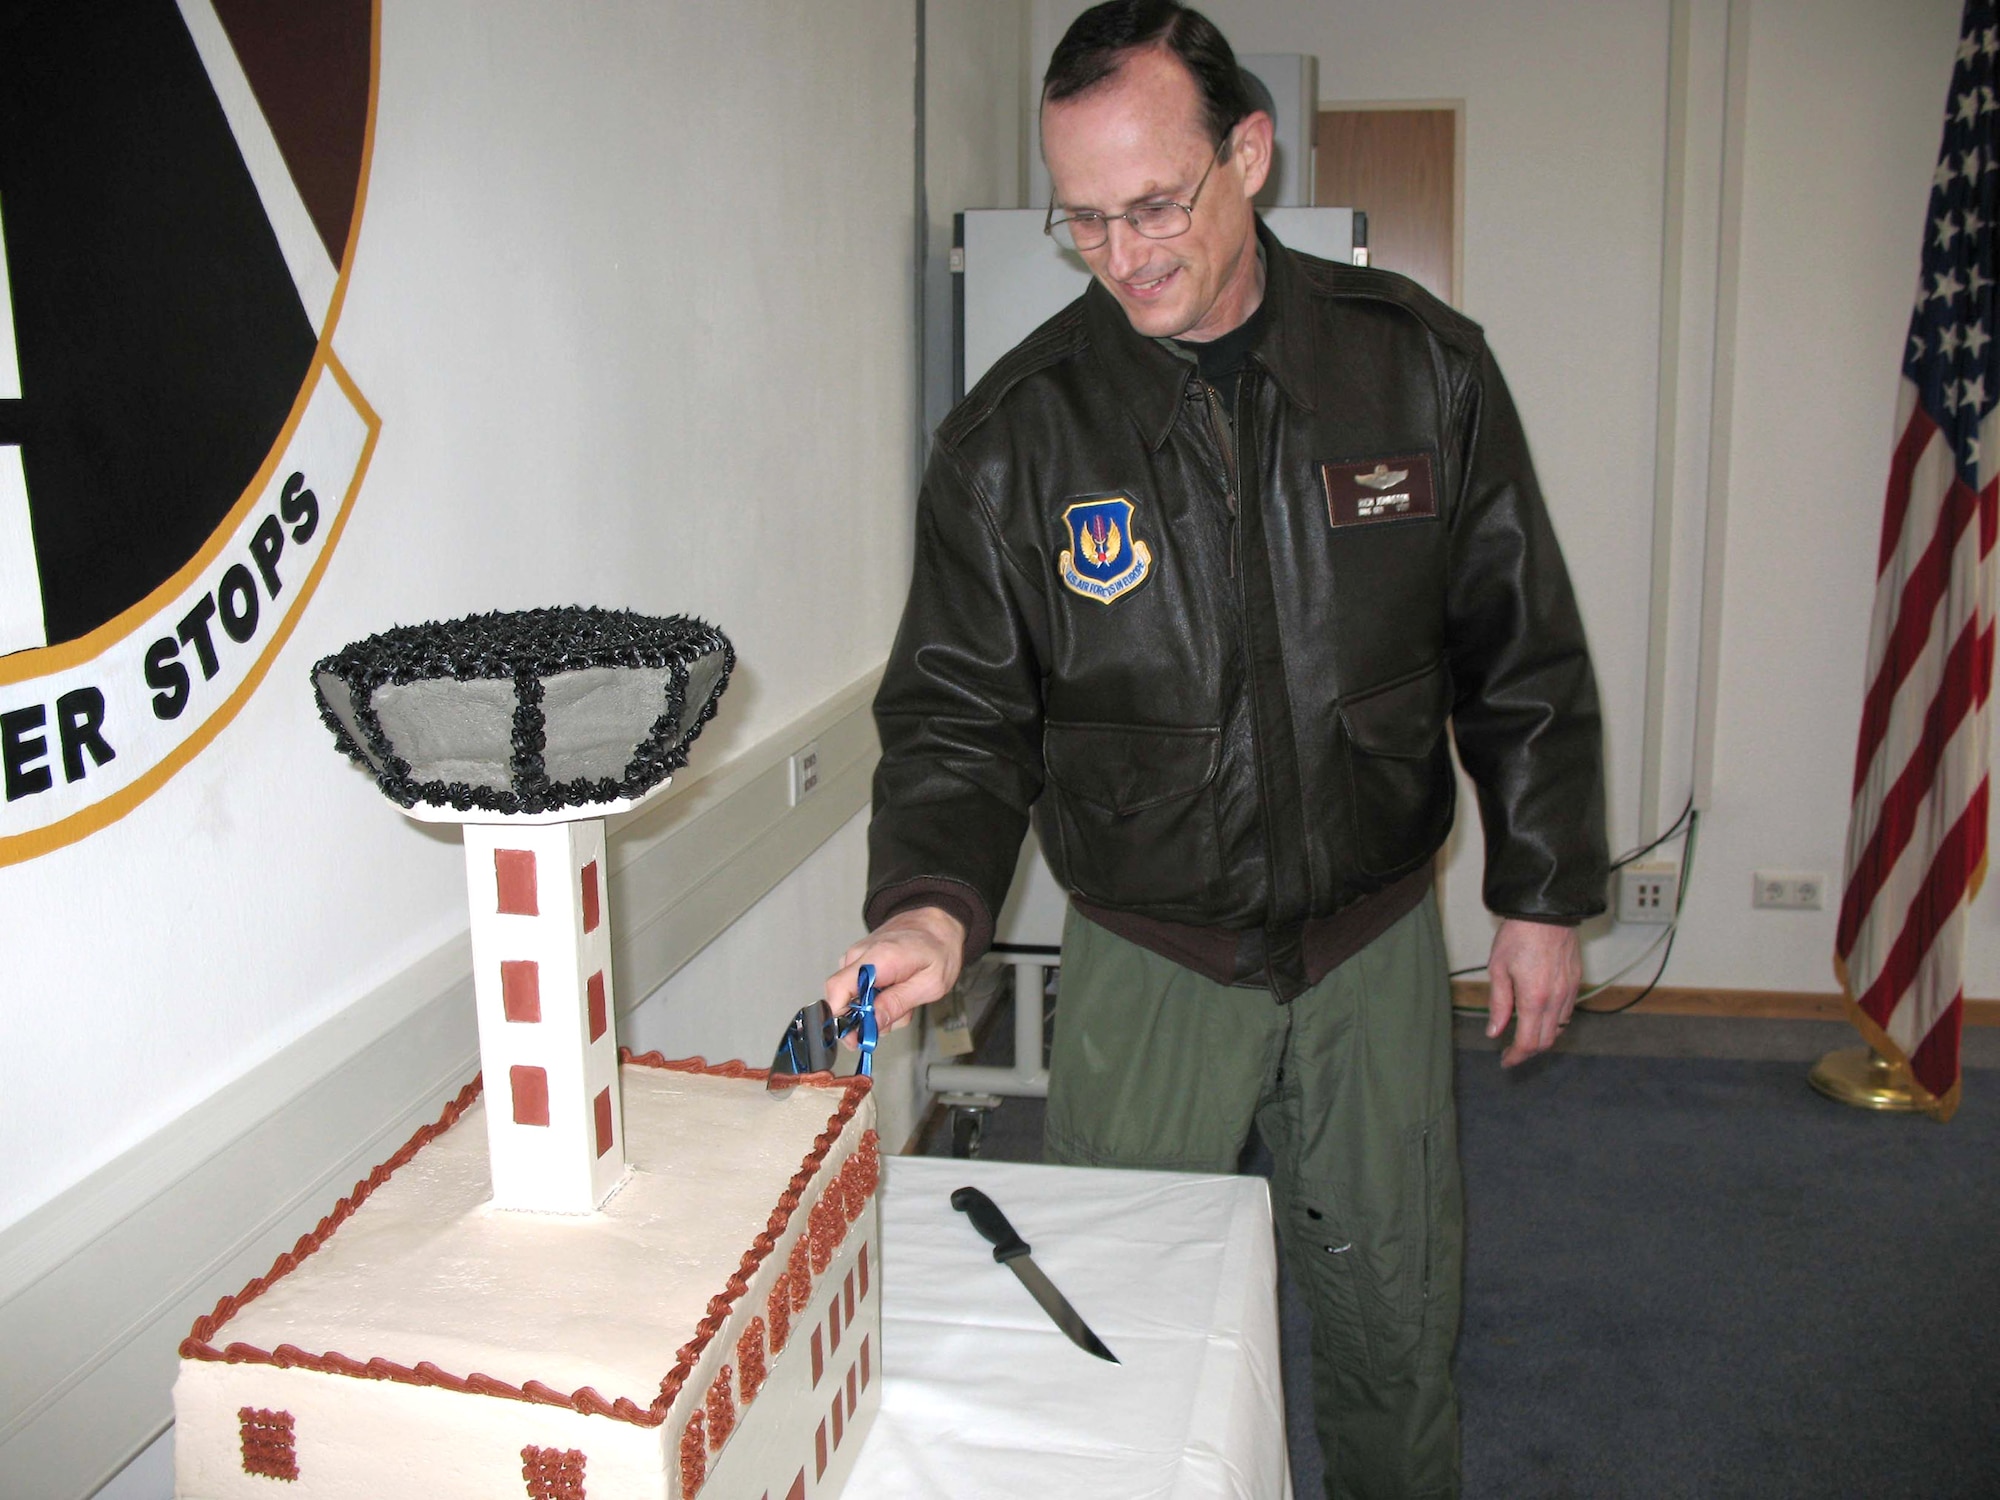 Brig. Gen. Richard Johnston cuts a tower of a cake March 13 in celebration of the new tower cab that opened at Ramstein Air Base, Germany.  General Johnston is the 86th Airlift Wing commander. (U.S. Air Force photo/Staff Sgt. Jason David)